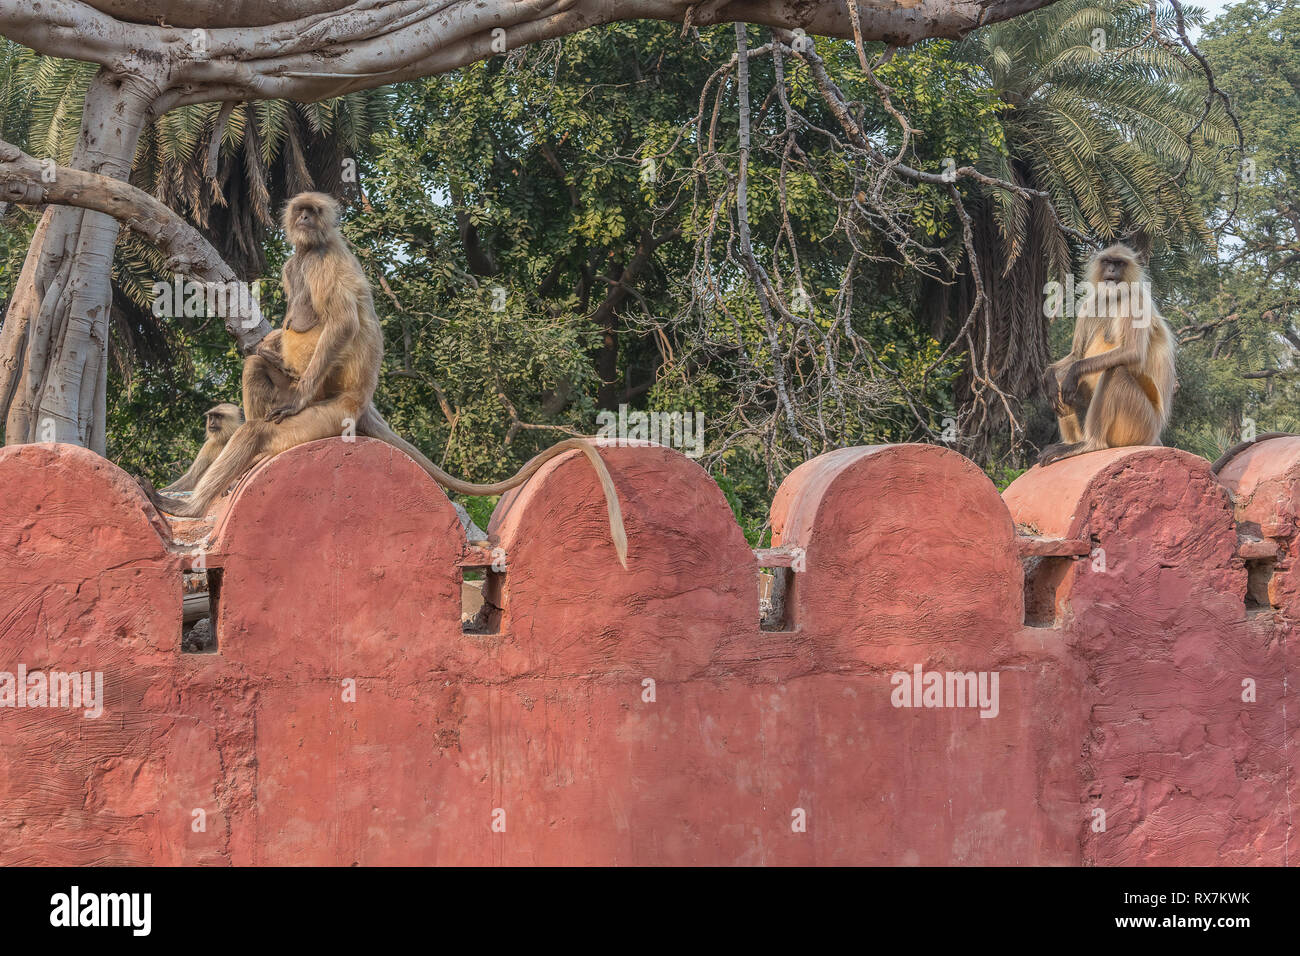 Gray Langur Monkey sitting on the ruins in Ranthambore National Park in India Stock Photo